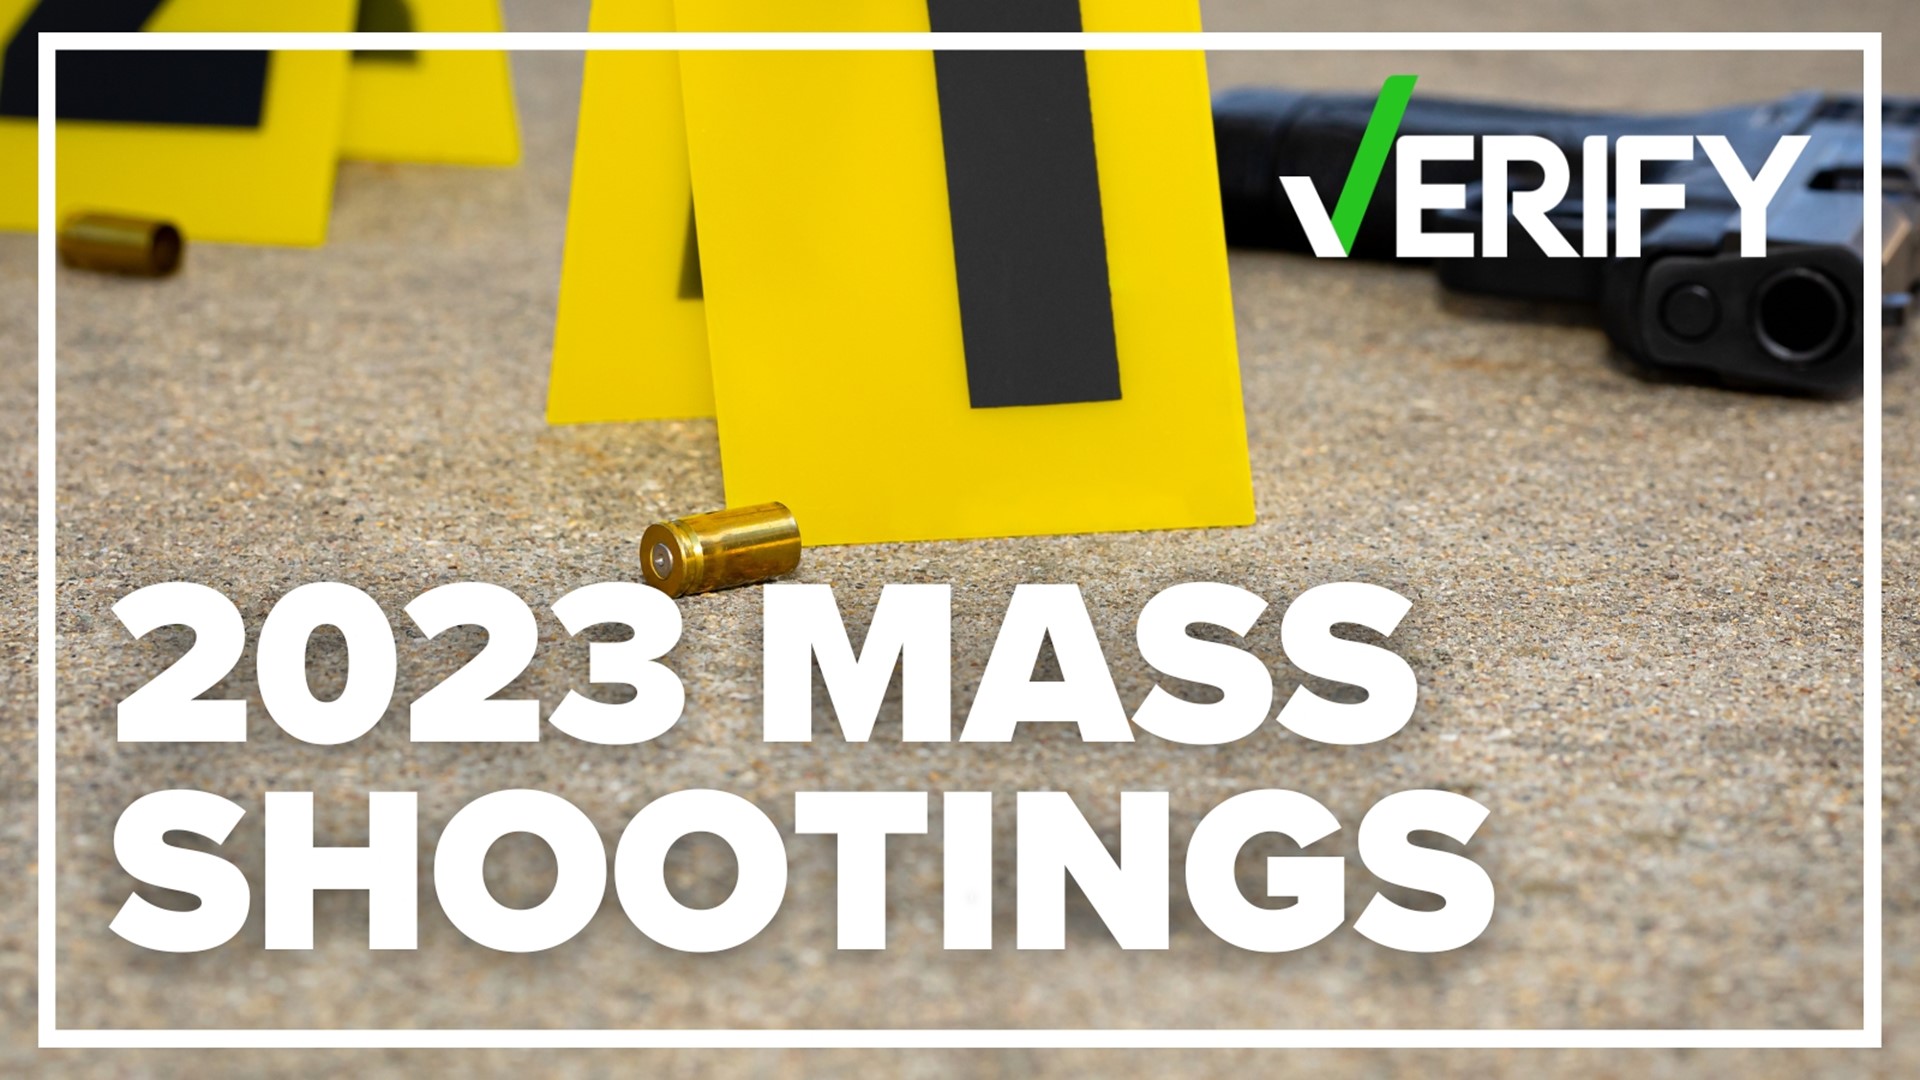 Have there been more mass shootings or are we just talking about them more?